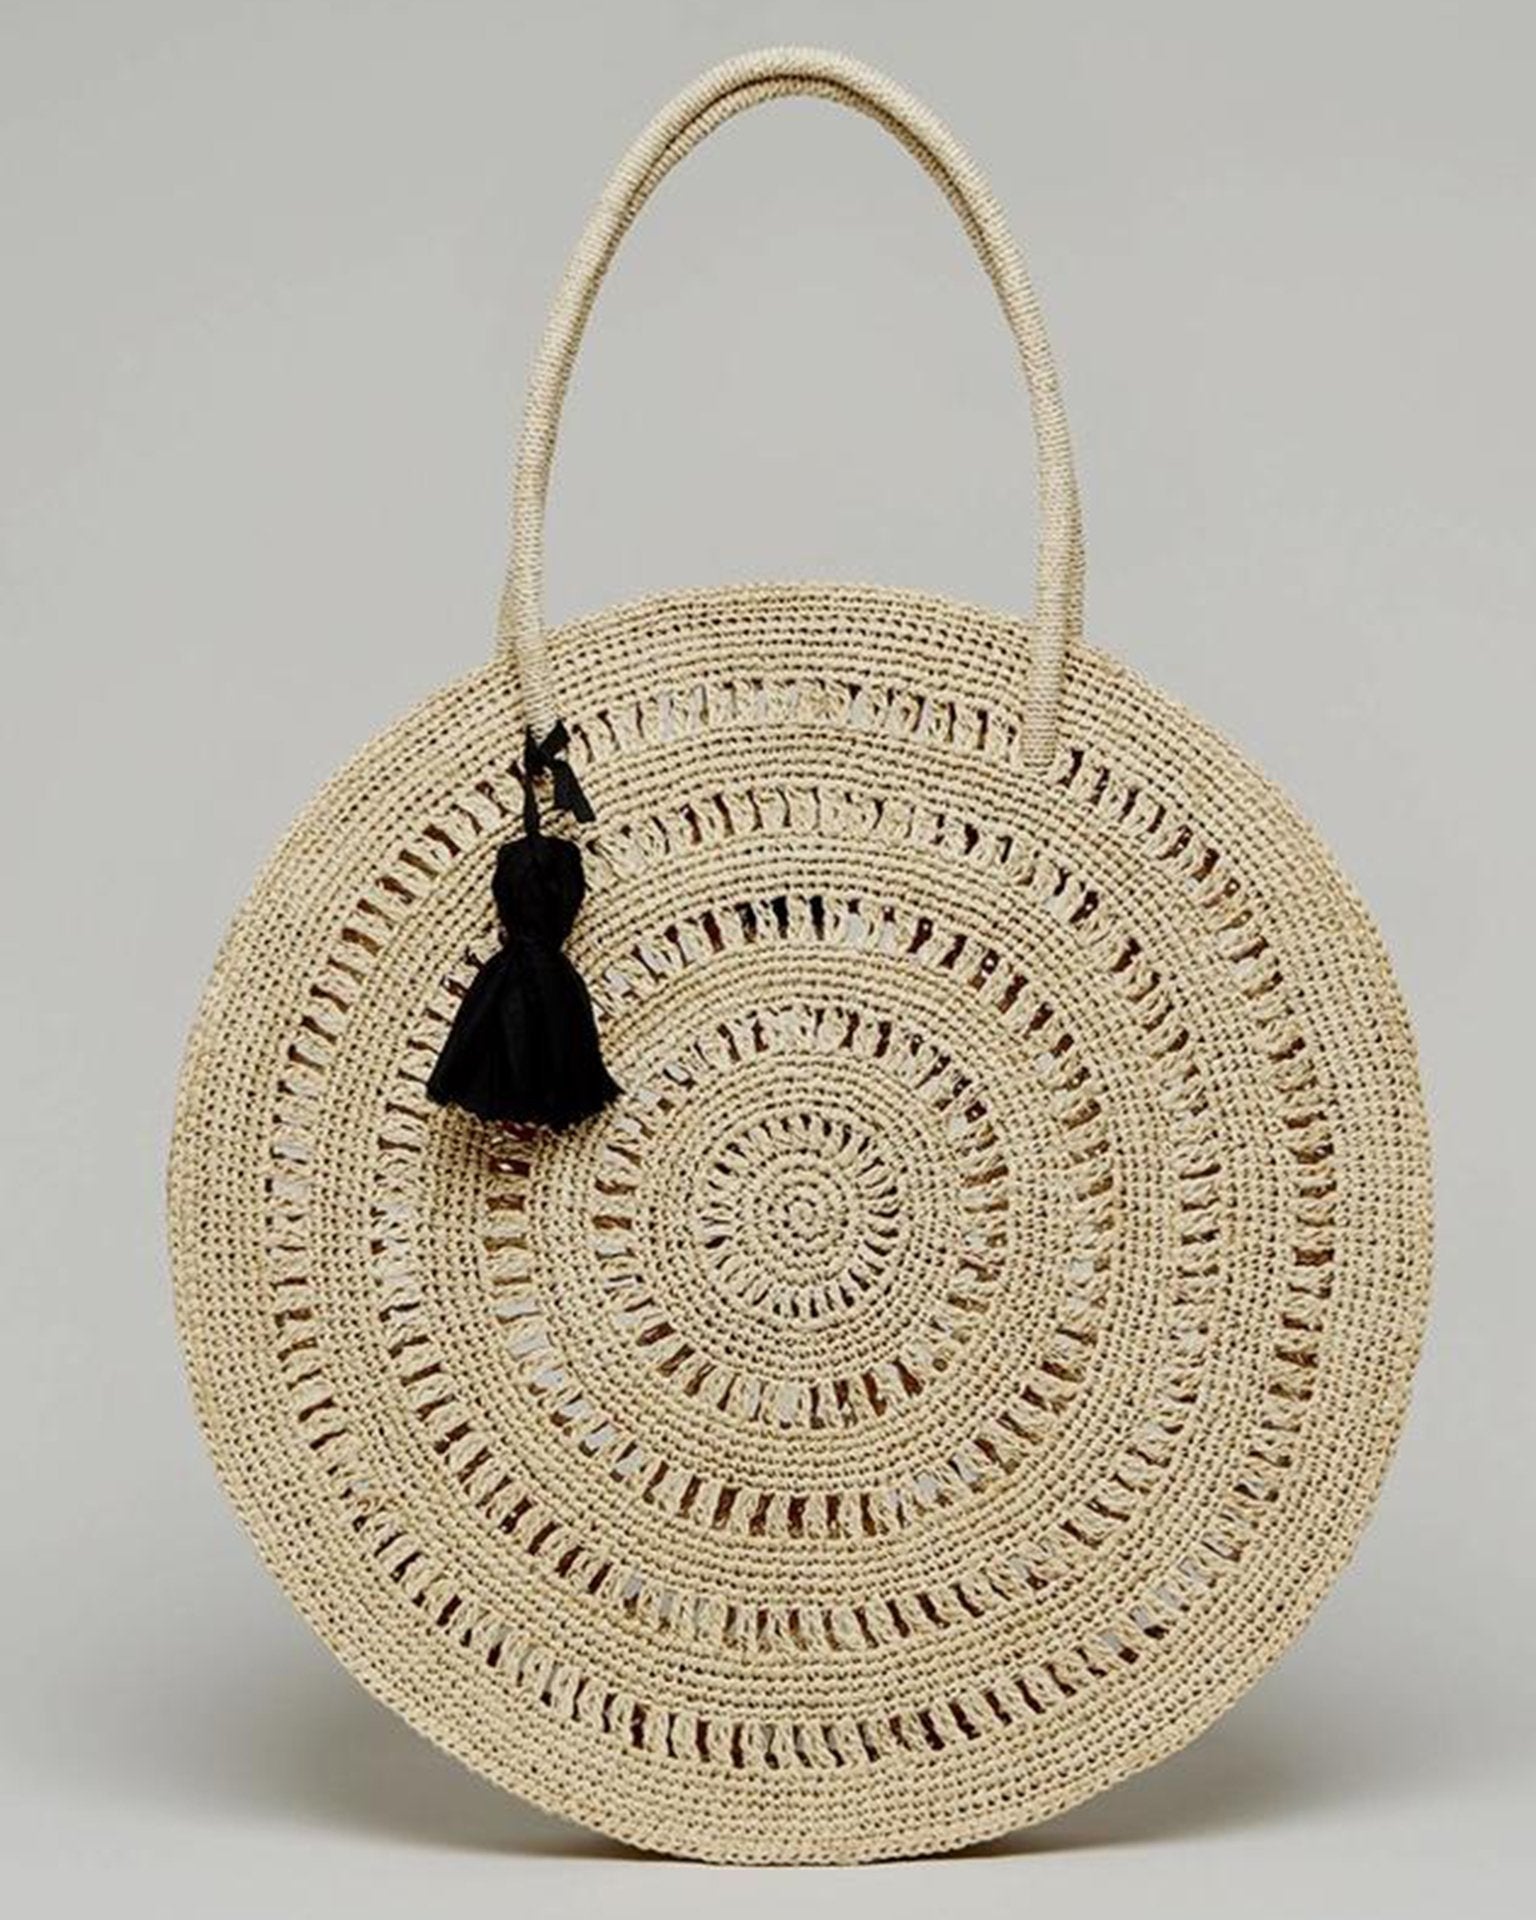 Authentic vintage brown round wicker basket leather round picnic / hat box  top handle purse with handmade straw flowers